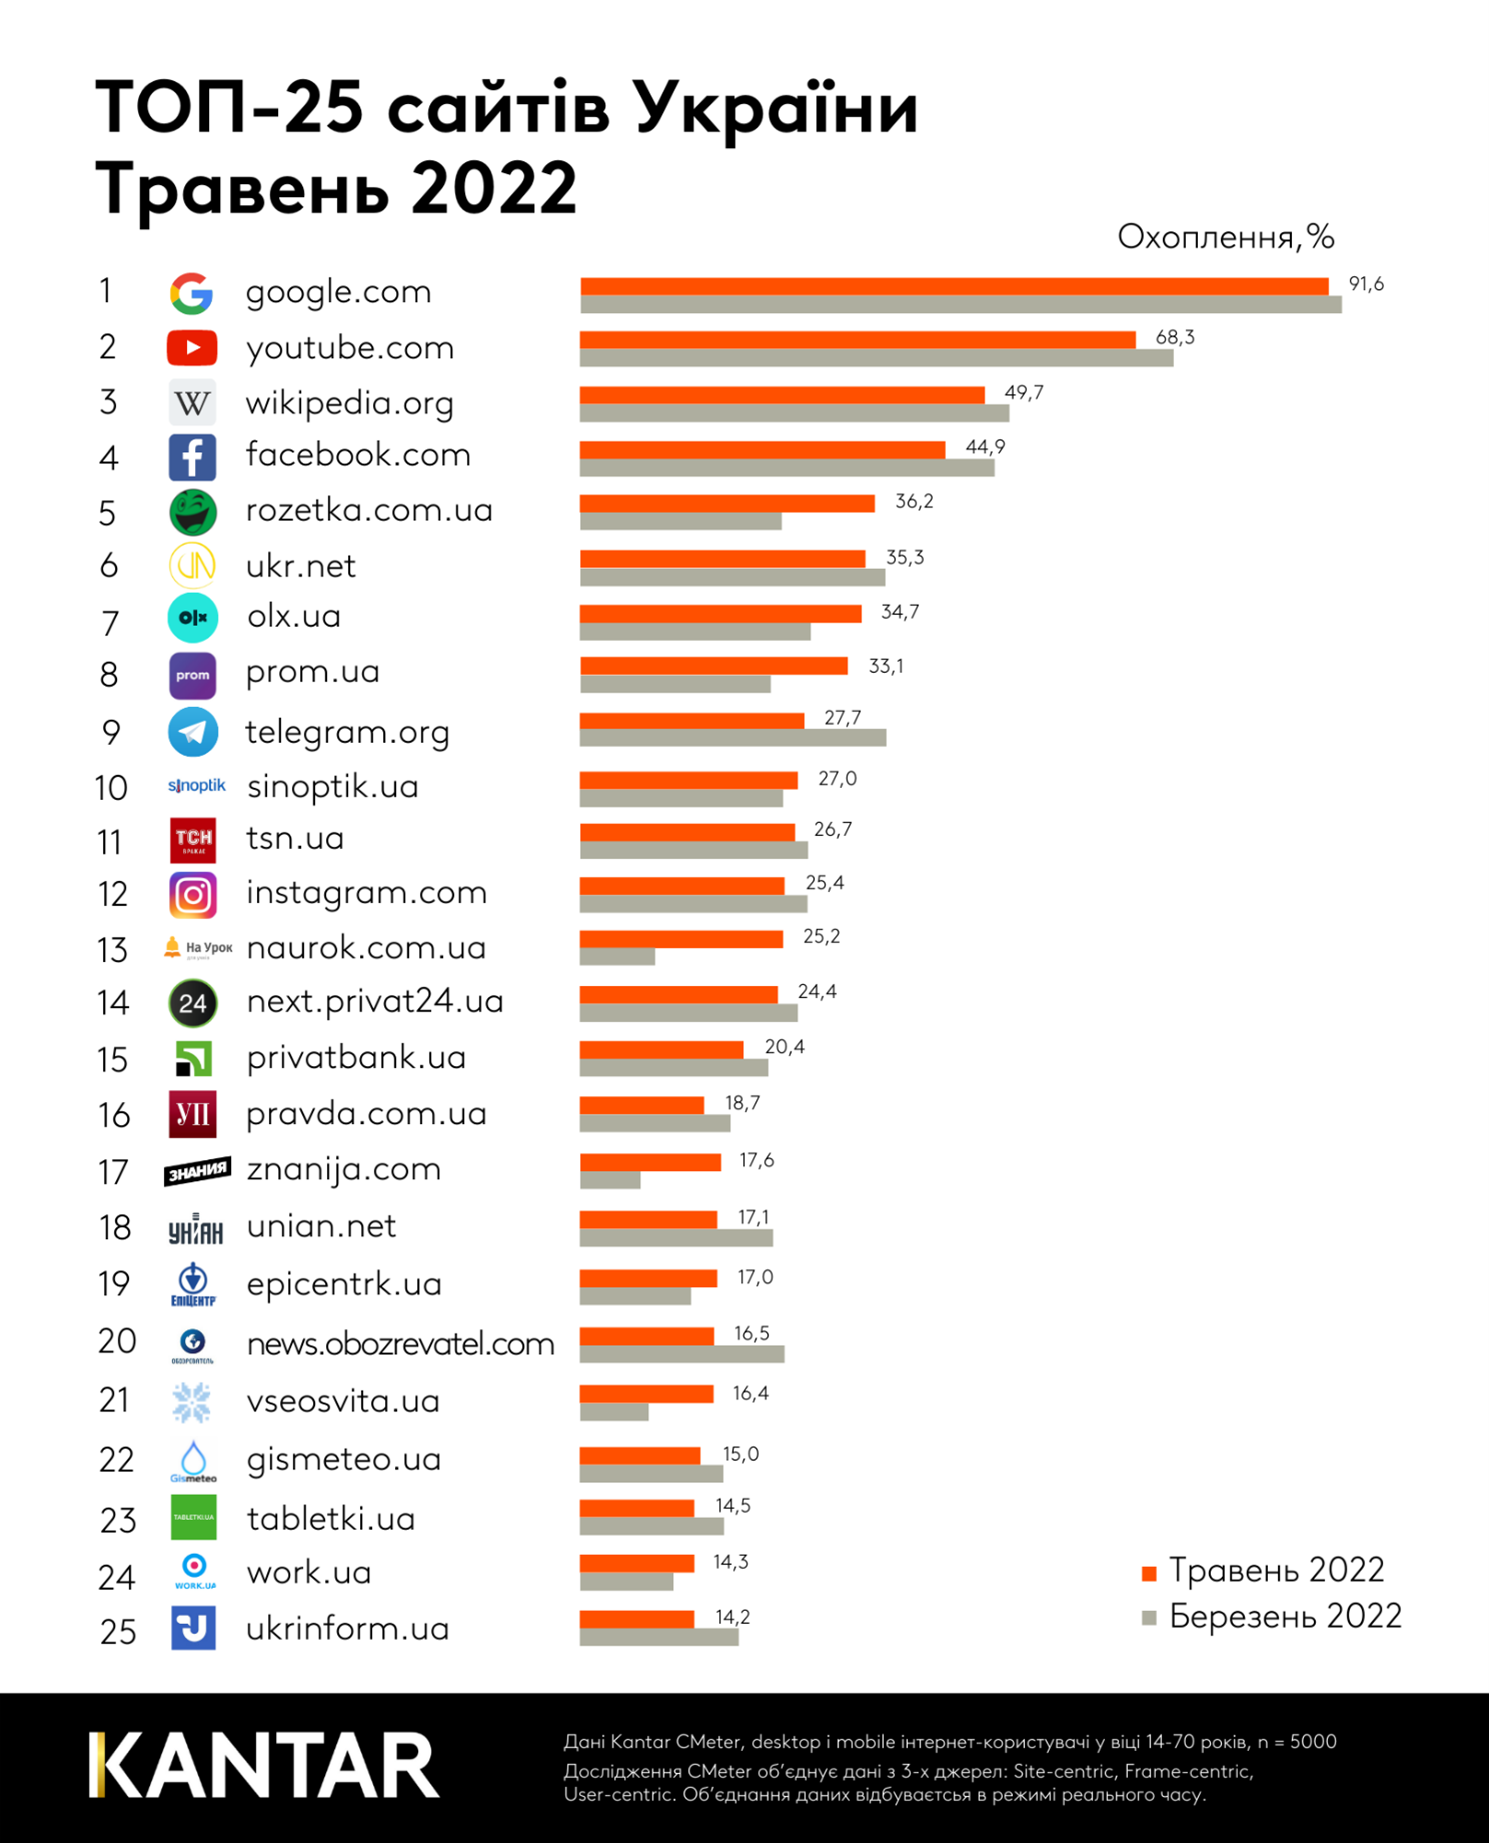 The most popular sites May 2022 Kantar Ukraine